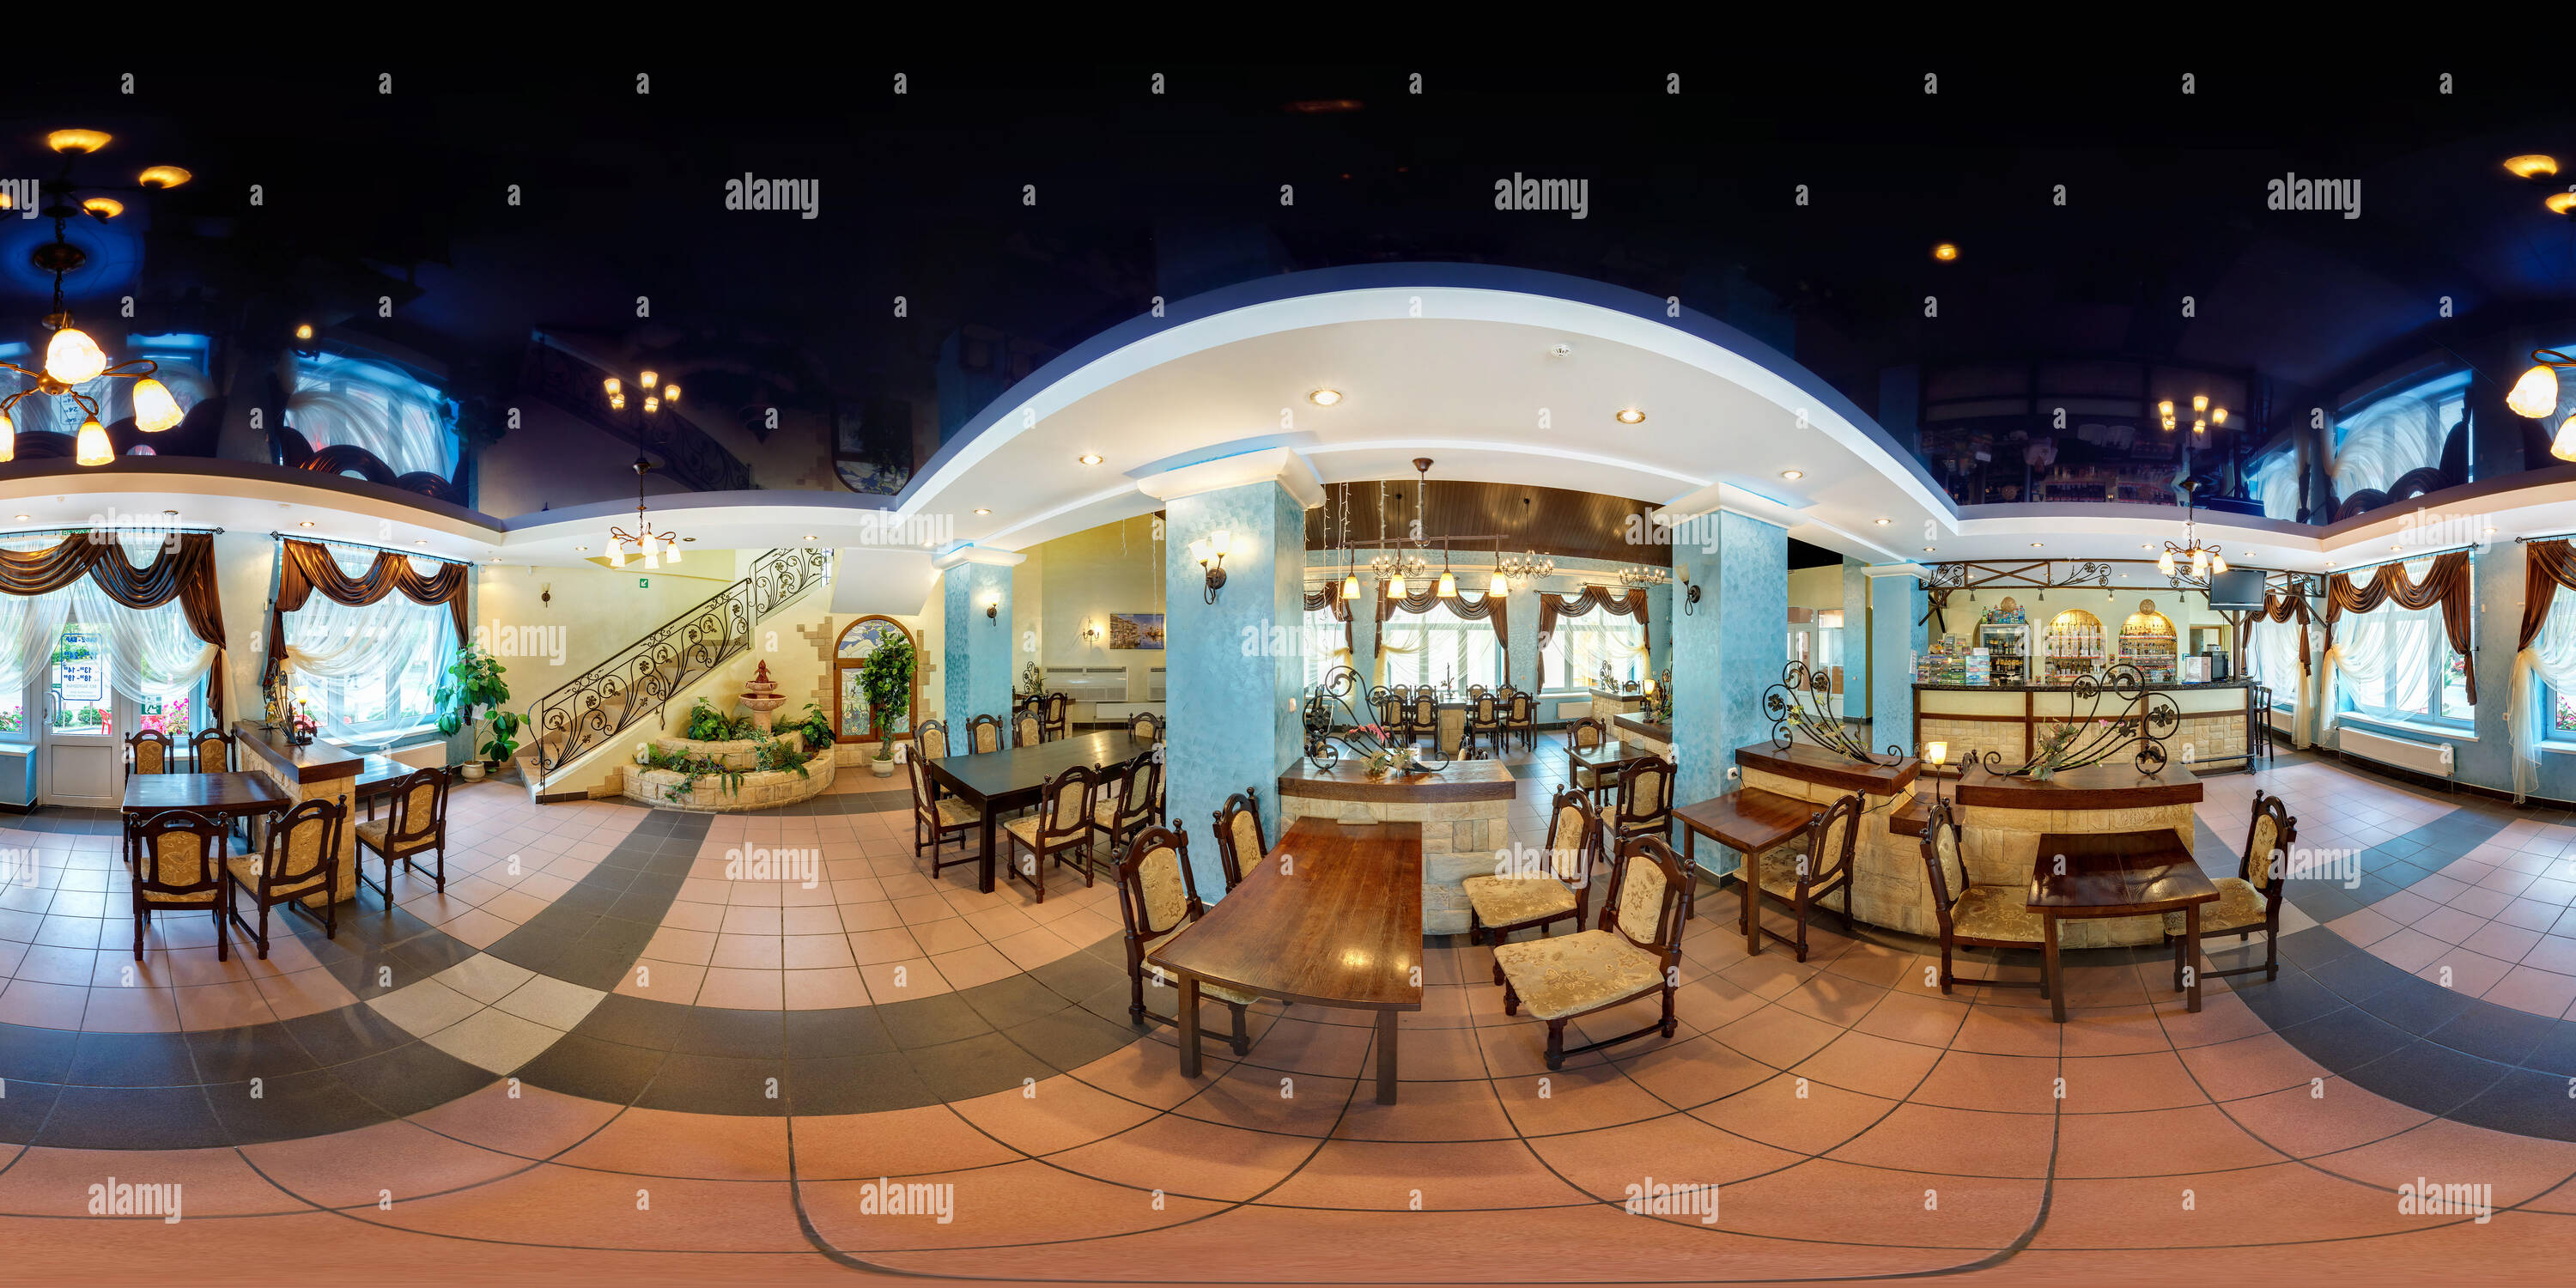 360 degree panoramic view of GRODNO, BELARUS - JULY 5, 2013: Panorama in interior of stylish modern cafe with stairs. Full 360 by 180 degree seamless  panorama  in equirectangular